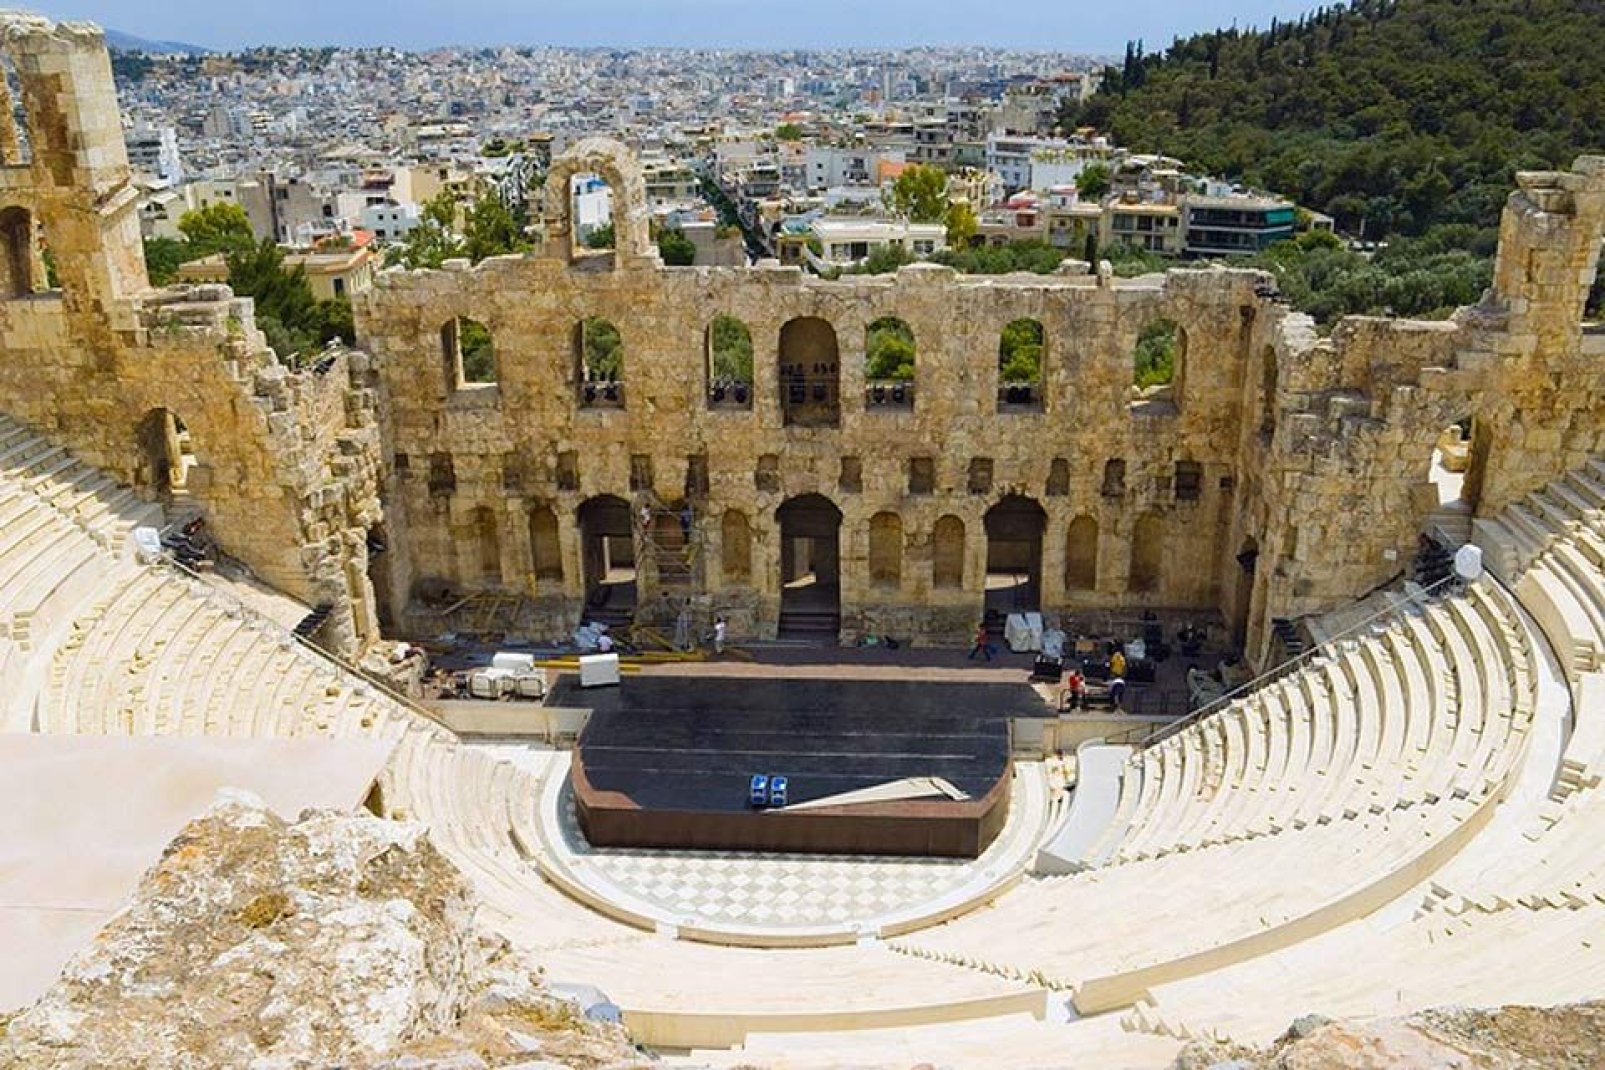 This theatre is located on the southern slope of the Acropolis.